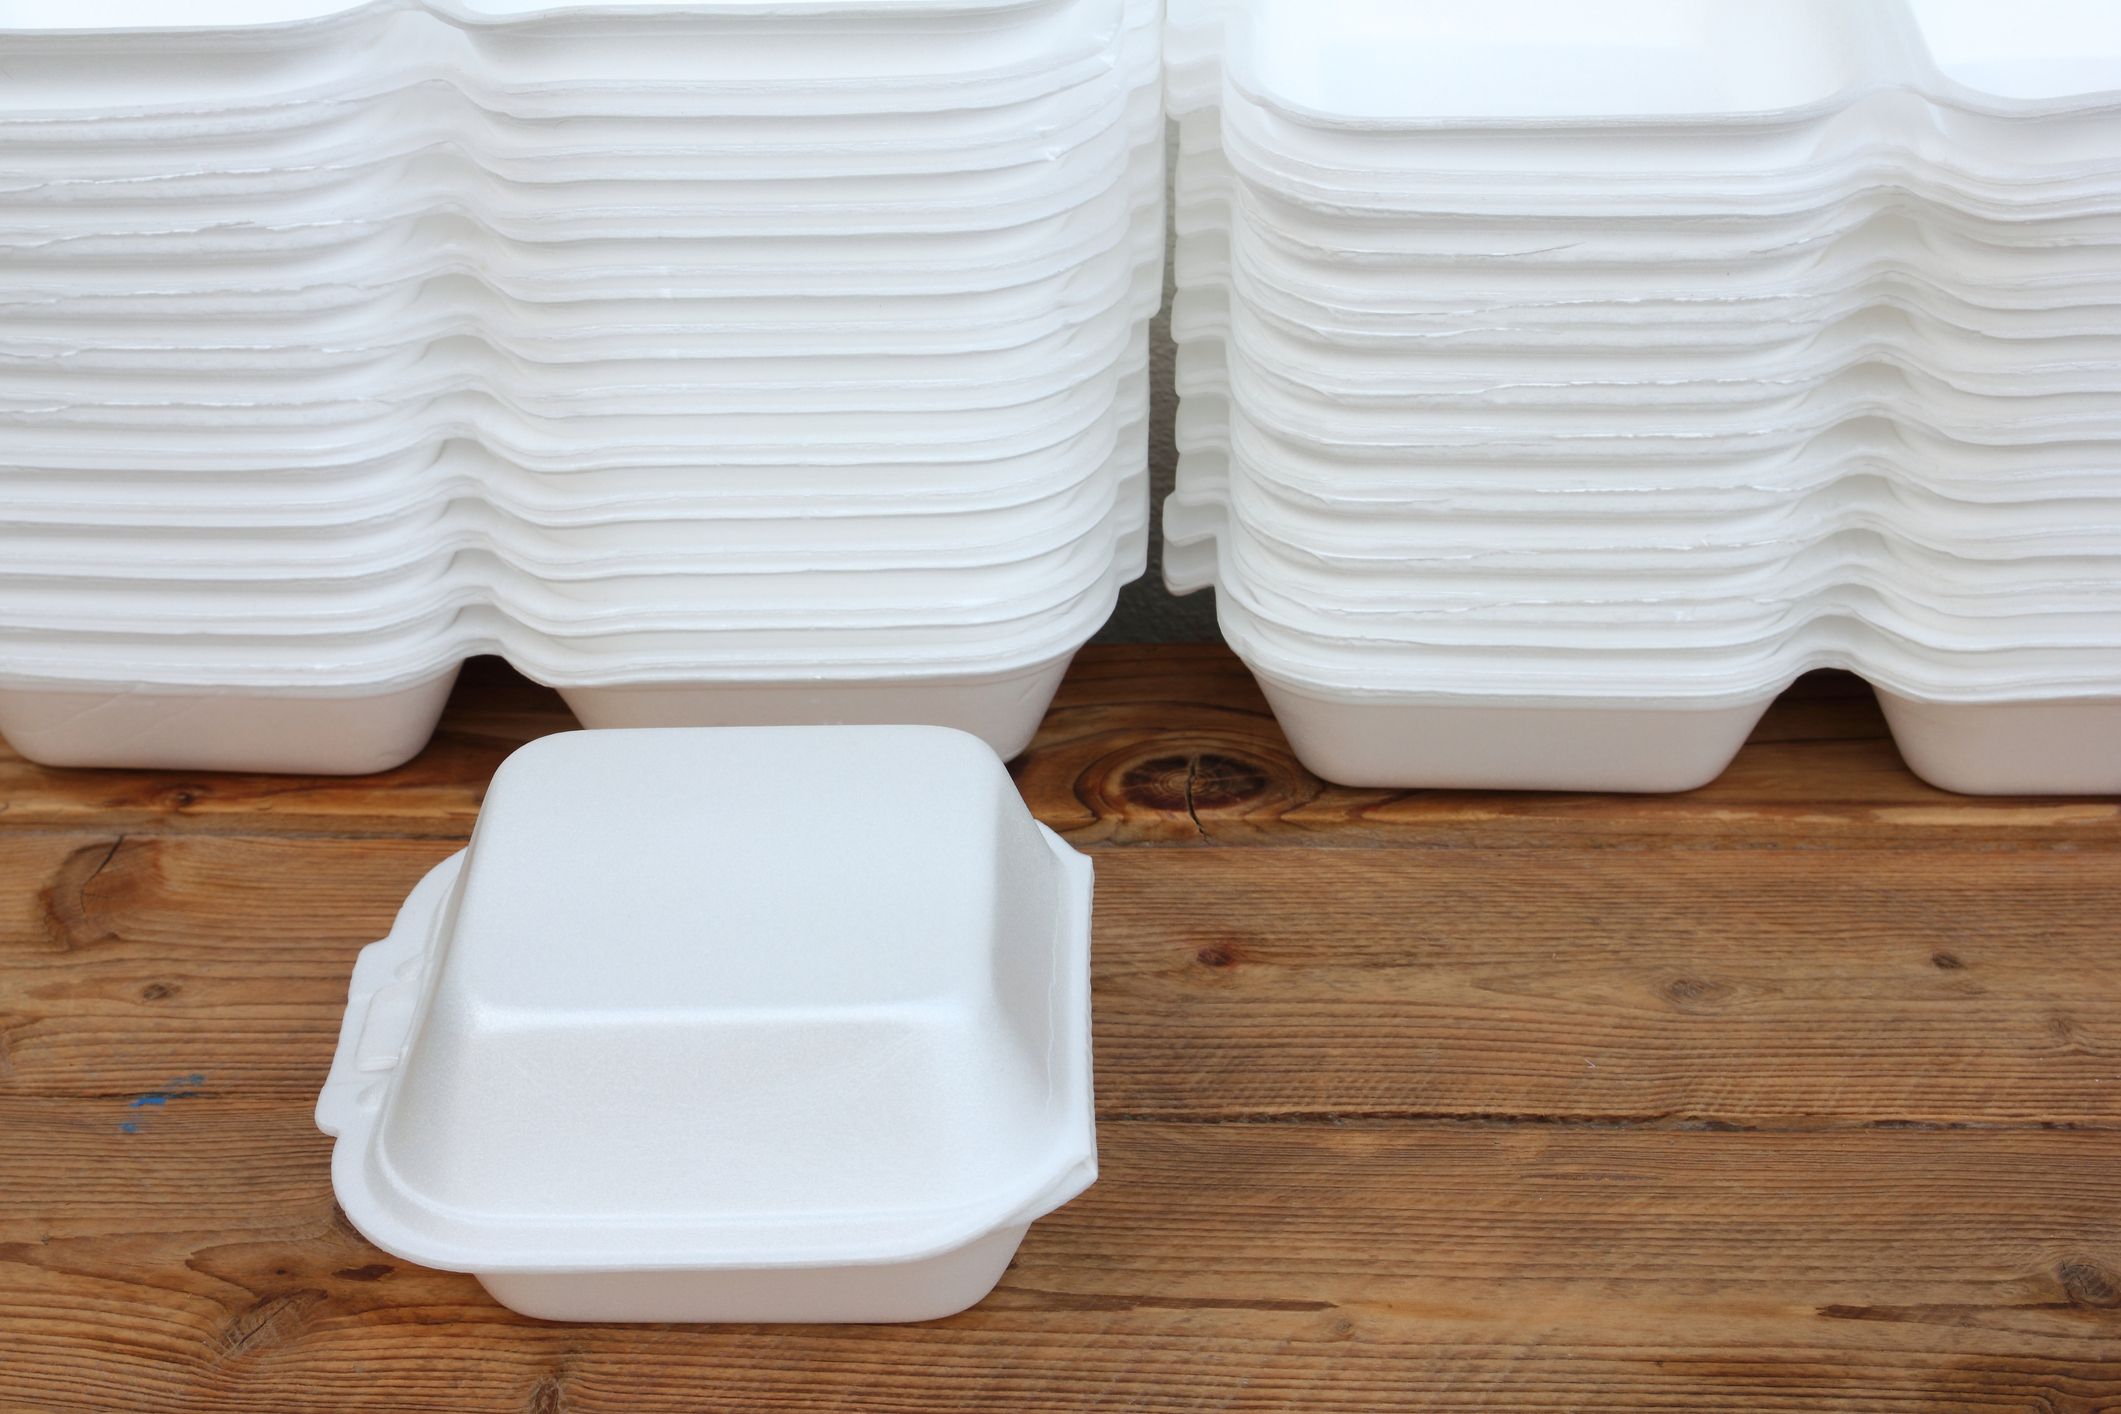 New Jersey considering a ban on styrofoam containers in schools - WHYY